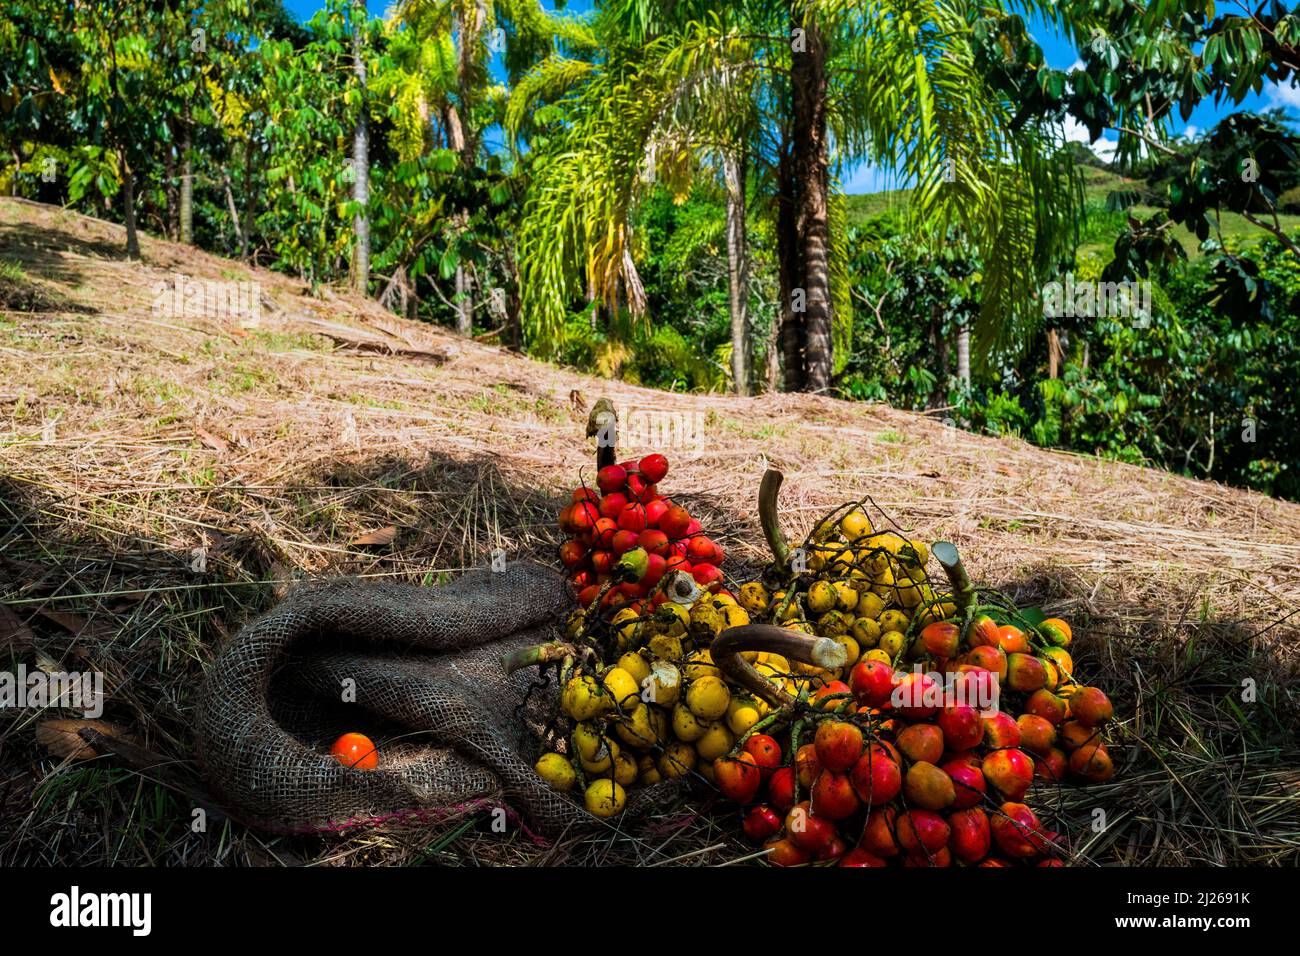 Freshly harvested bunches of chontaduro (peach palm) fruits are seen lying on the ground on a farm near El Tambo, Cauca, Colombia. Stock Photo